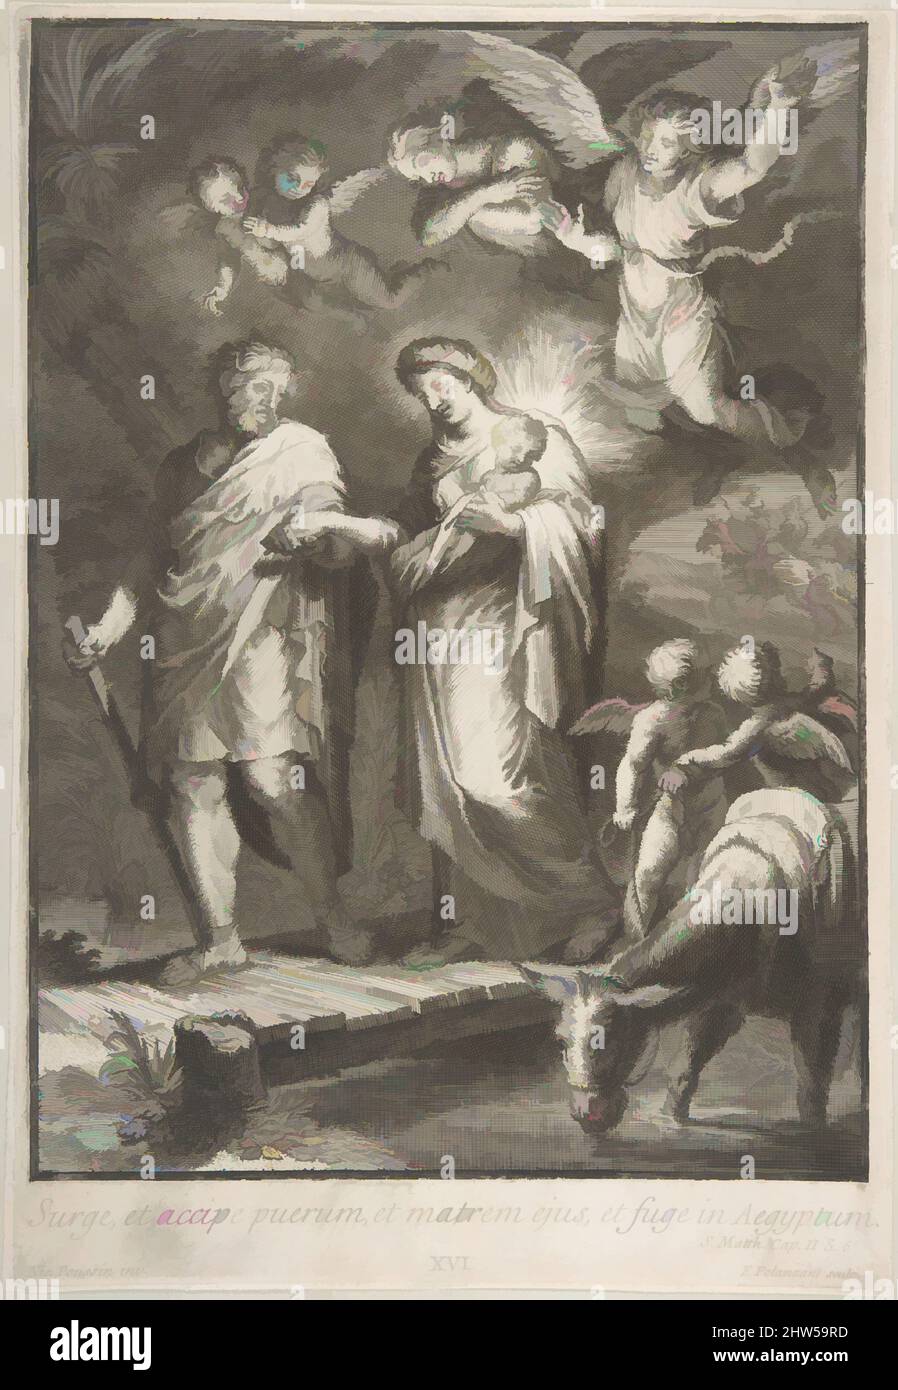 Art inspired by The Flight into Egypt, 1700–(?), Engraving., 33.0 x 22.7 cm., Prints, Francesco Polanzani (Italian, Noale near Venice 1700–after 1783 Venice (?)), After Jacques Stella (French, Lyons 1596–1657 Paris, Classic works modernized by Artotop with a splash of modernity. Shapes, color and value, eye-catching visual impact on art. Emotions through freedom of artworks in a contemporary way. A timeless message pursuing a wildly creative new direction. Artists turning to the digital medium and creating the Artotop NFT Stock Photo